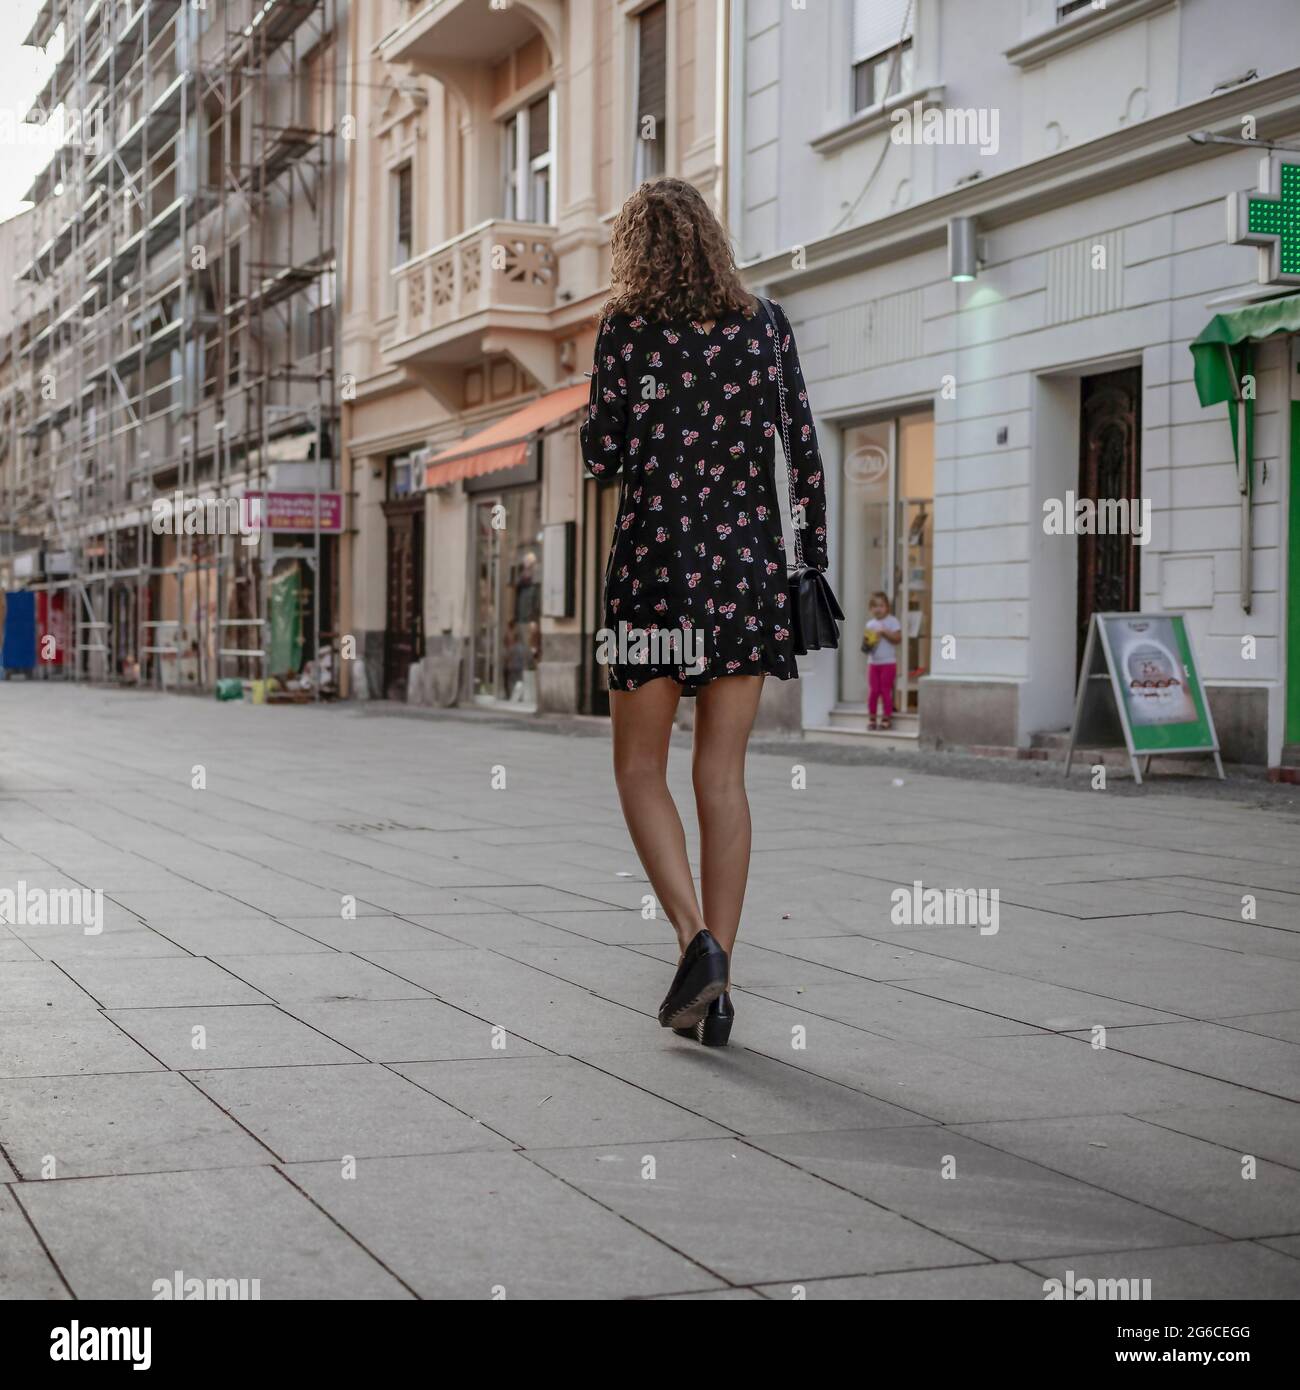 Urban scene with a slender woman walking down the street Stock Photo